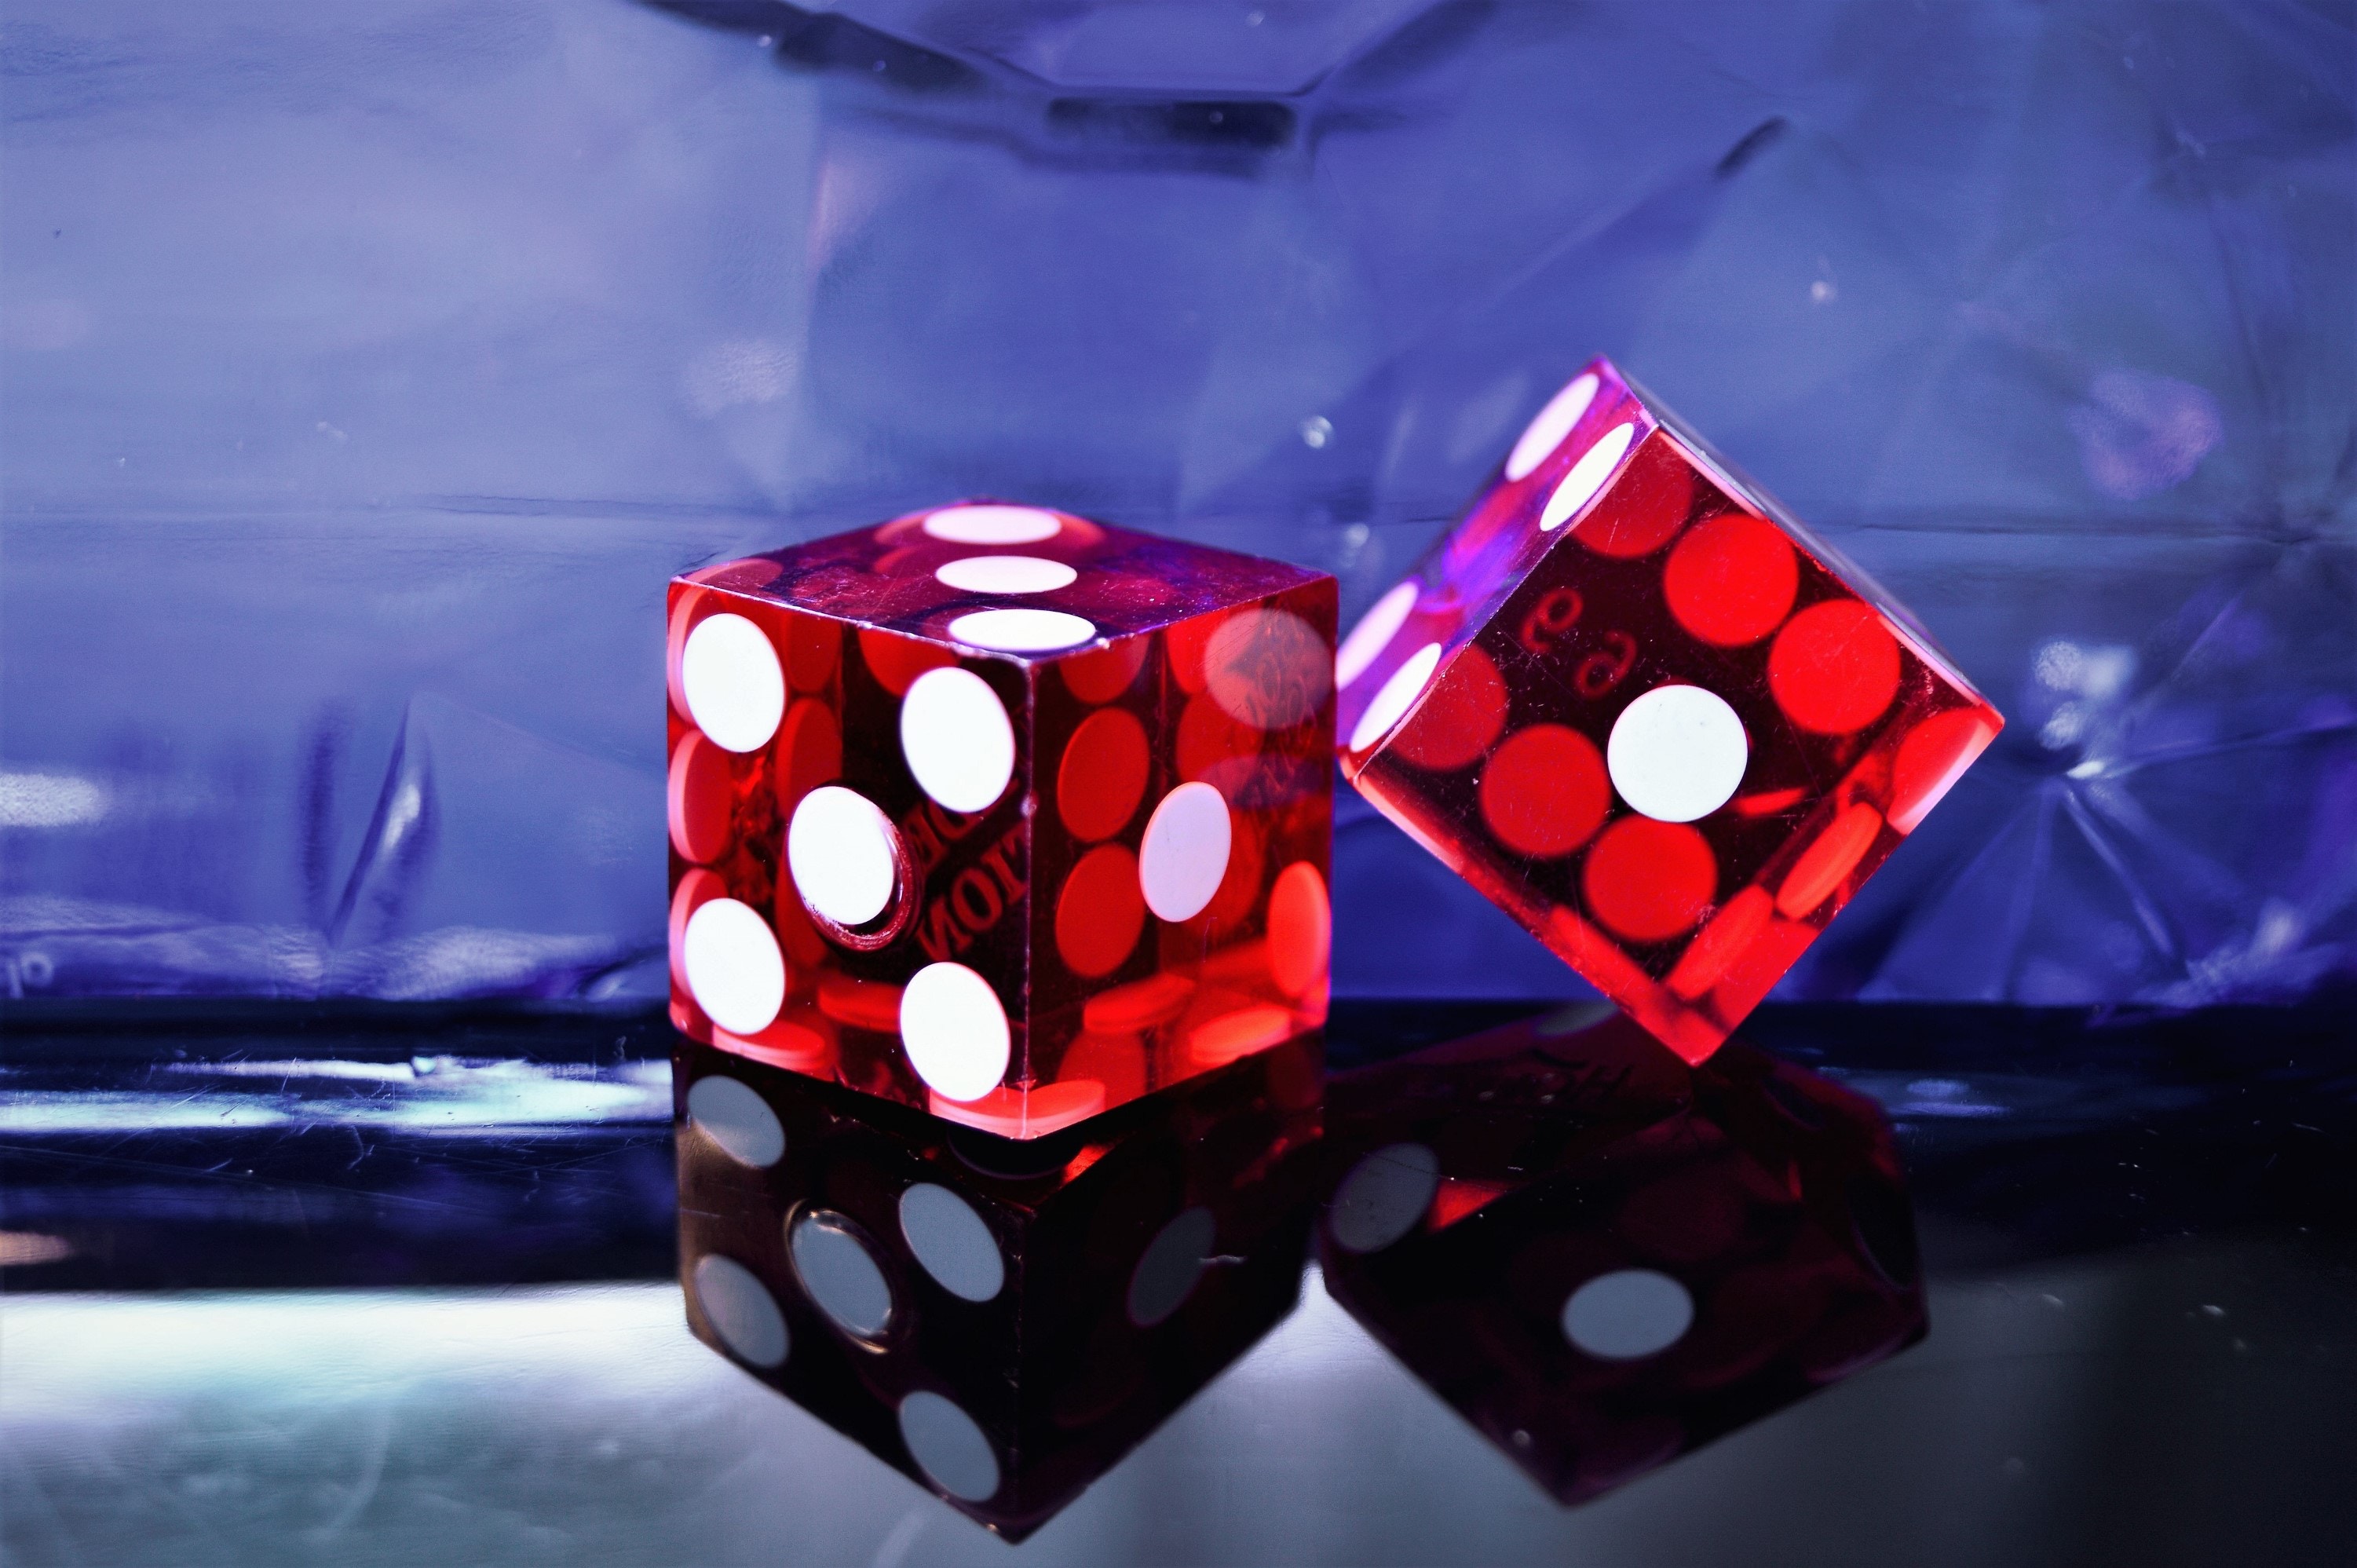 trusted online mobile casinos for us players